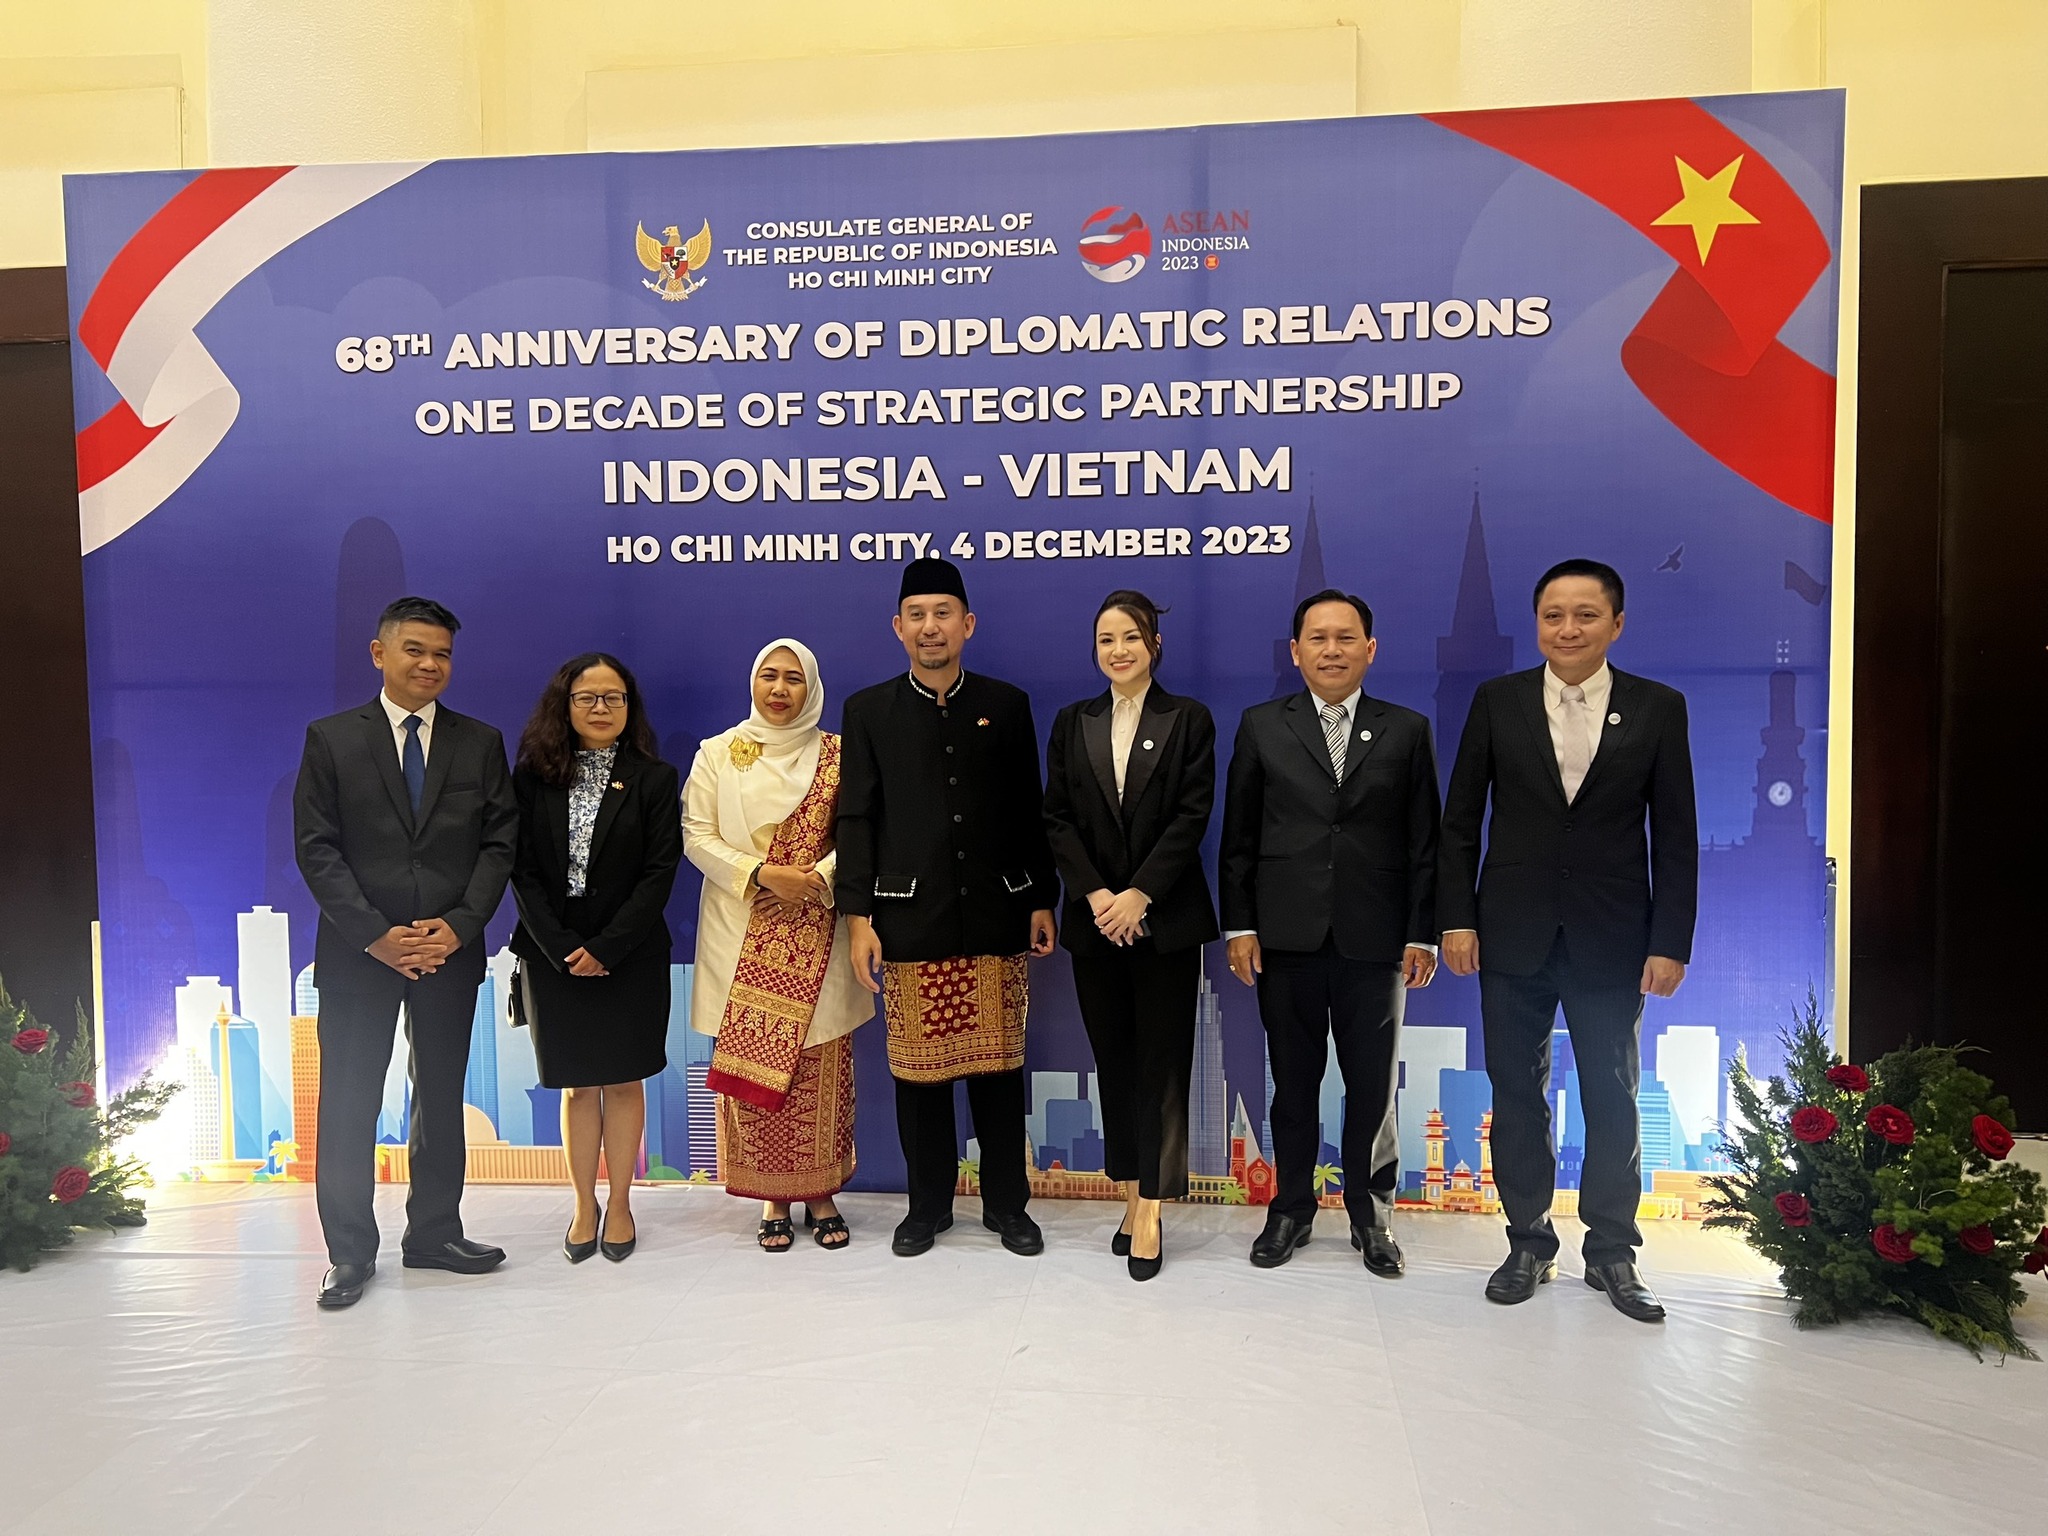 May be an image of 7 people, dais and text that says '5 68TH ANNIVERSARY OF DIPLOMATIC RELATIONS CONSULATE GENERAL THE REPUBLIC FINDONESIA INDONESIA 2023 Ho CHI MINH CITY ONE DECADE OF STRATEGIC PARTNERSHIP INDONESIA VIETNAM Ho CHI MINH CITY. 4 DECEMBER 2023'